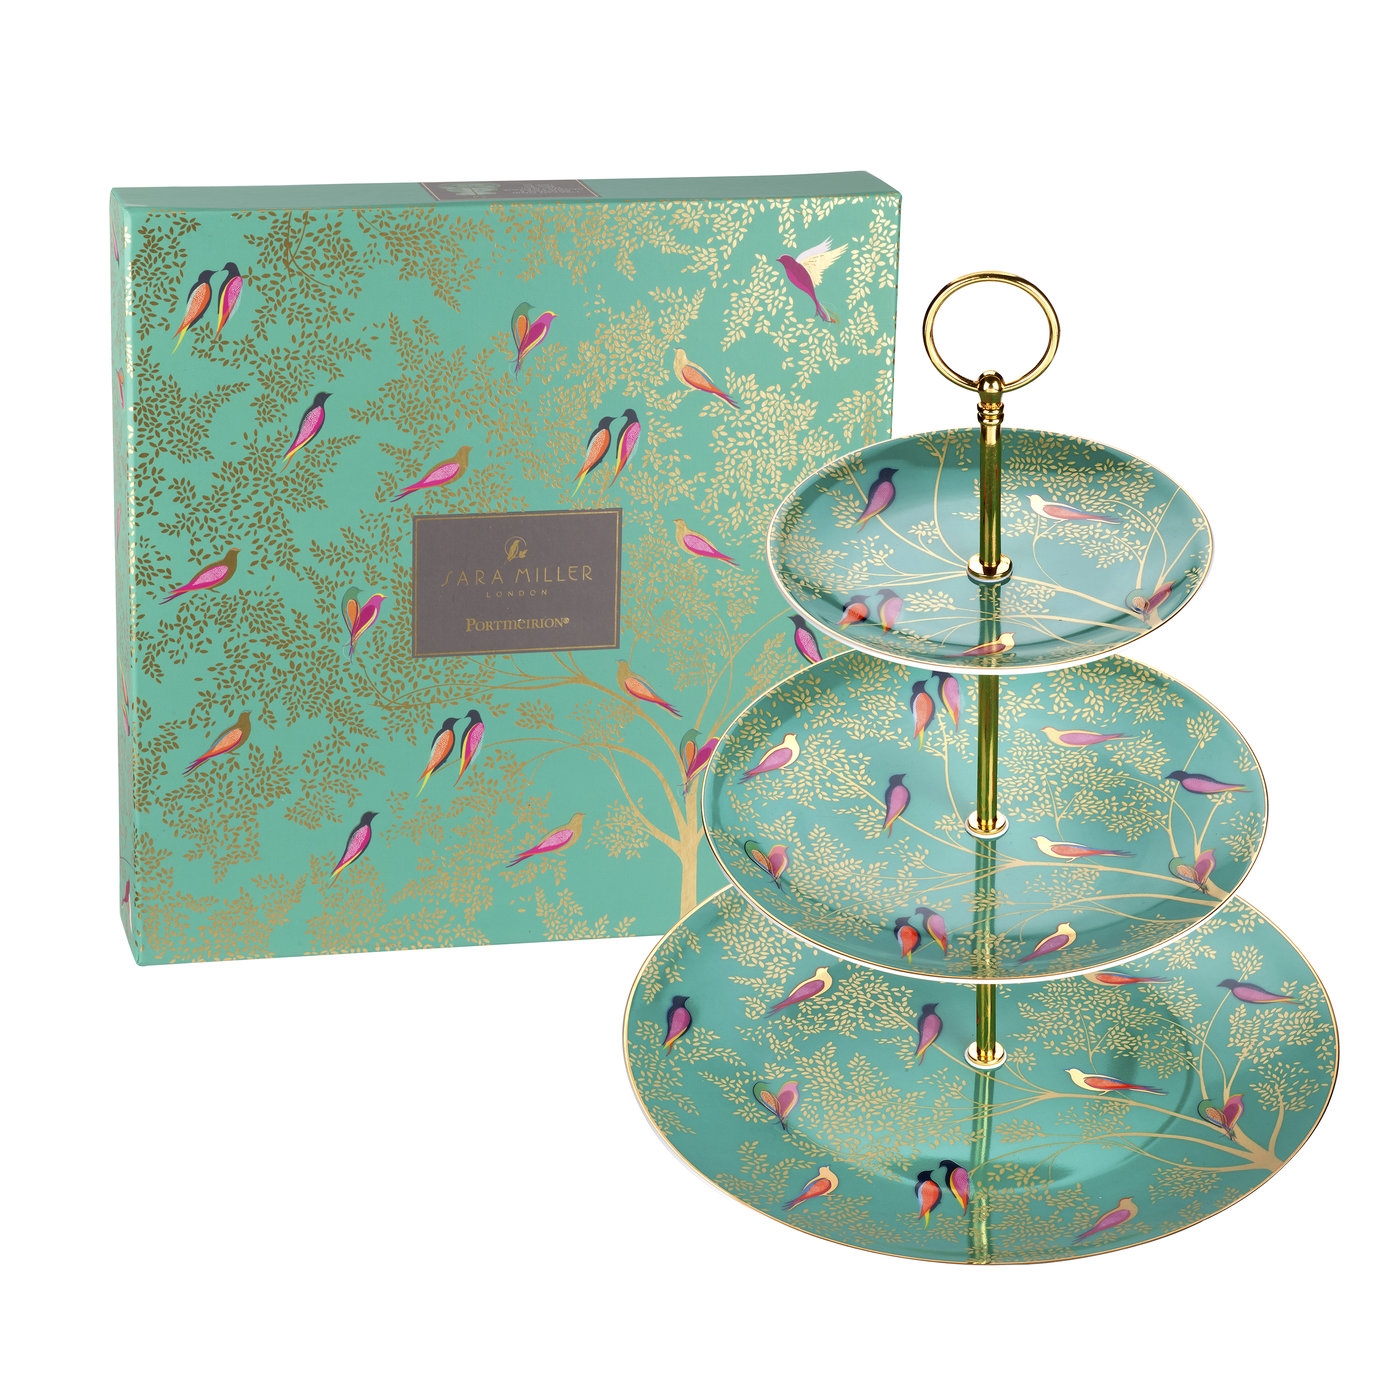 Sara Miller London Chelsea 3 Tier Cake Stand (Green) image number null